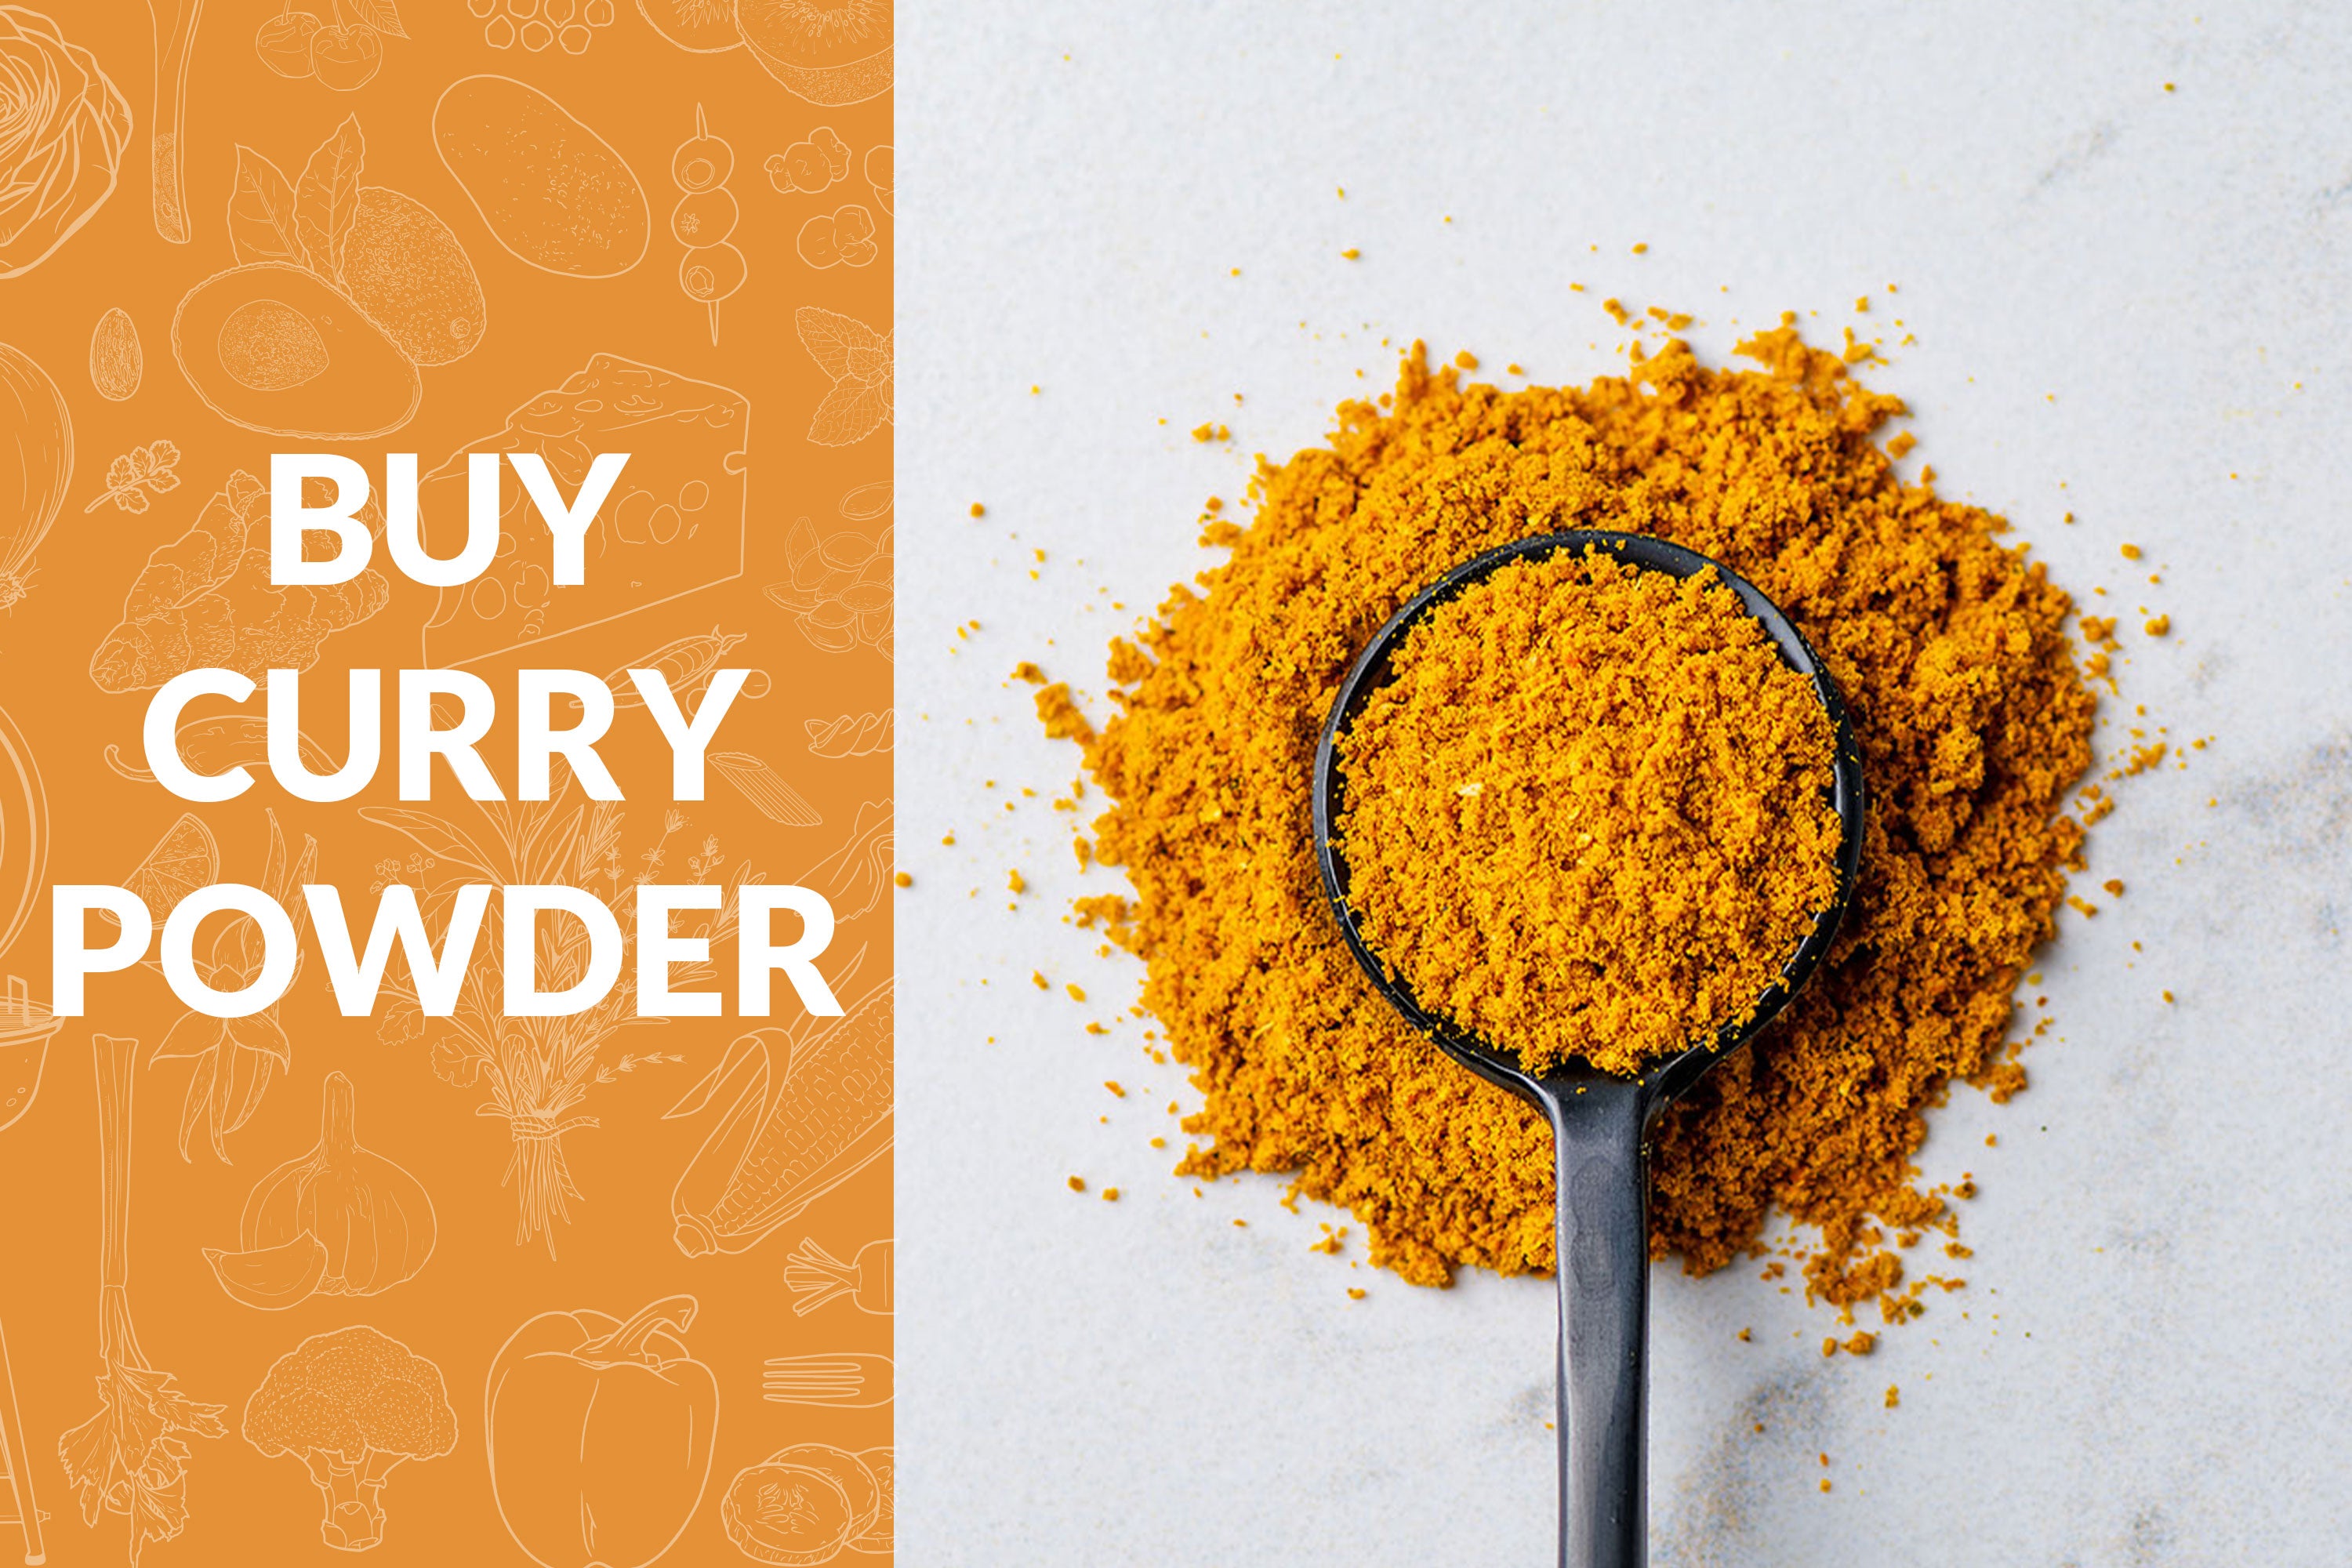 Buy Curry Powder on the left with spoon of curry powder on the right